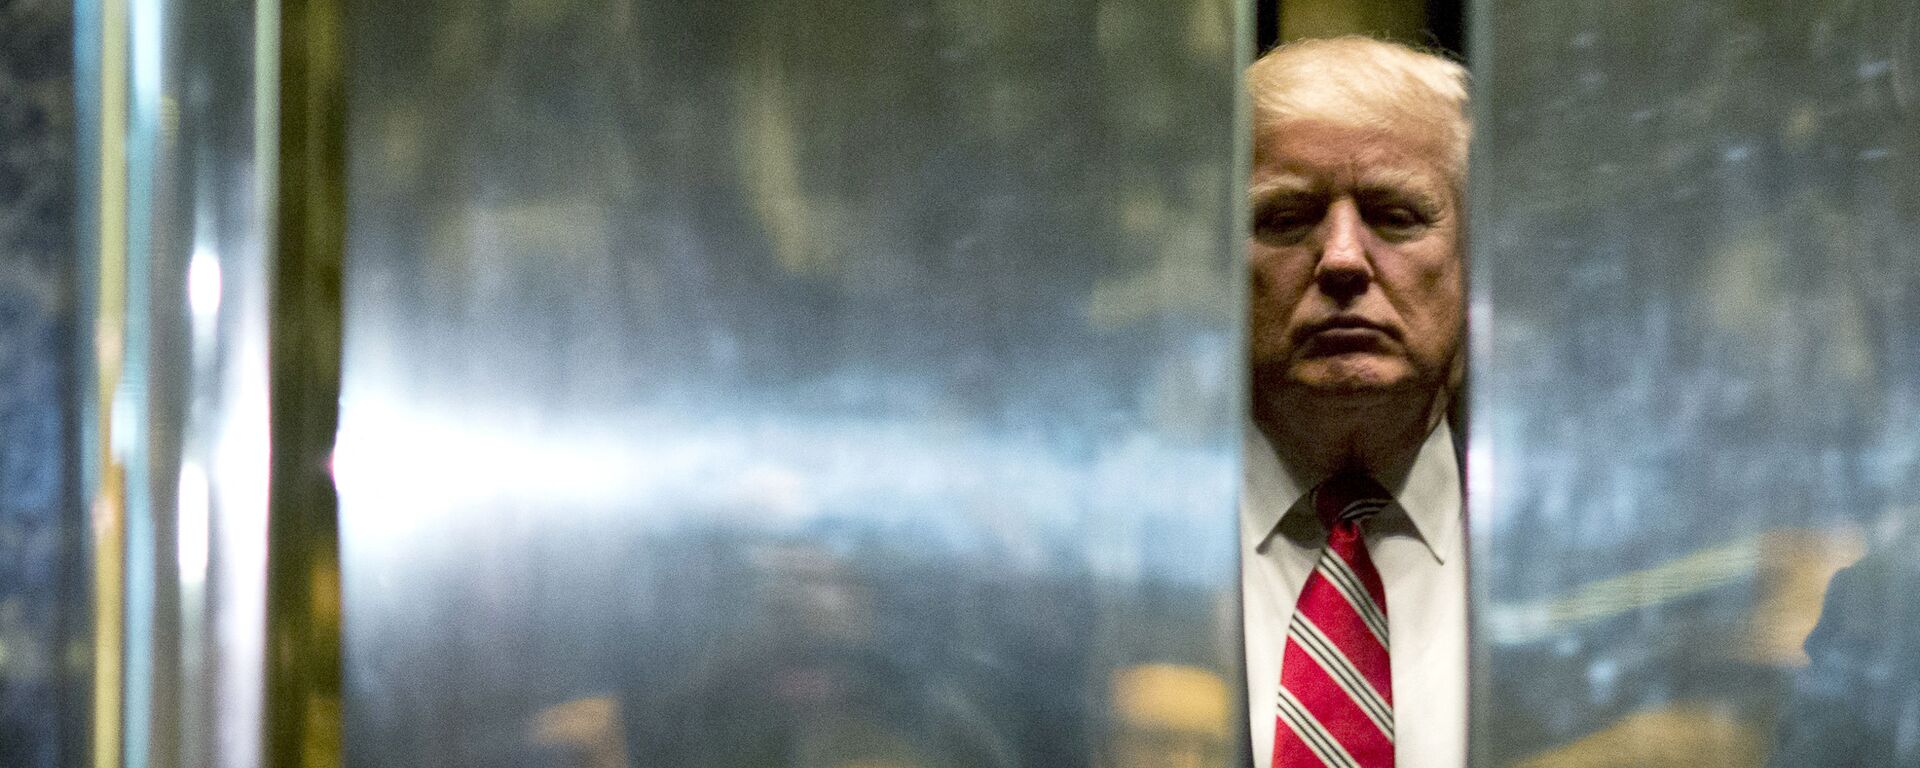 In this file photo taken on January 16, 2017 US President-elect Donald Trump boards the elevator after escorting Martin Luther King III to the lobby after meetings at Trump Tower in New York City. - The Trump Organization is being investigated in a criminal capacity as New York prosecutors advance their probe into former president Donald Trump's business dealings, the state attorney general announced Tuesday. We have informed the Trump Organization that our investigation into the organization is no longer purely civil in nature, a spokesman for Attorney General Letitia James' office said. We are now actively investigating the Trump Organization in a criminal capacity, along with the Manhattan DA. - Sputnik International, 1920, 24.10.2022